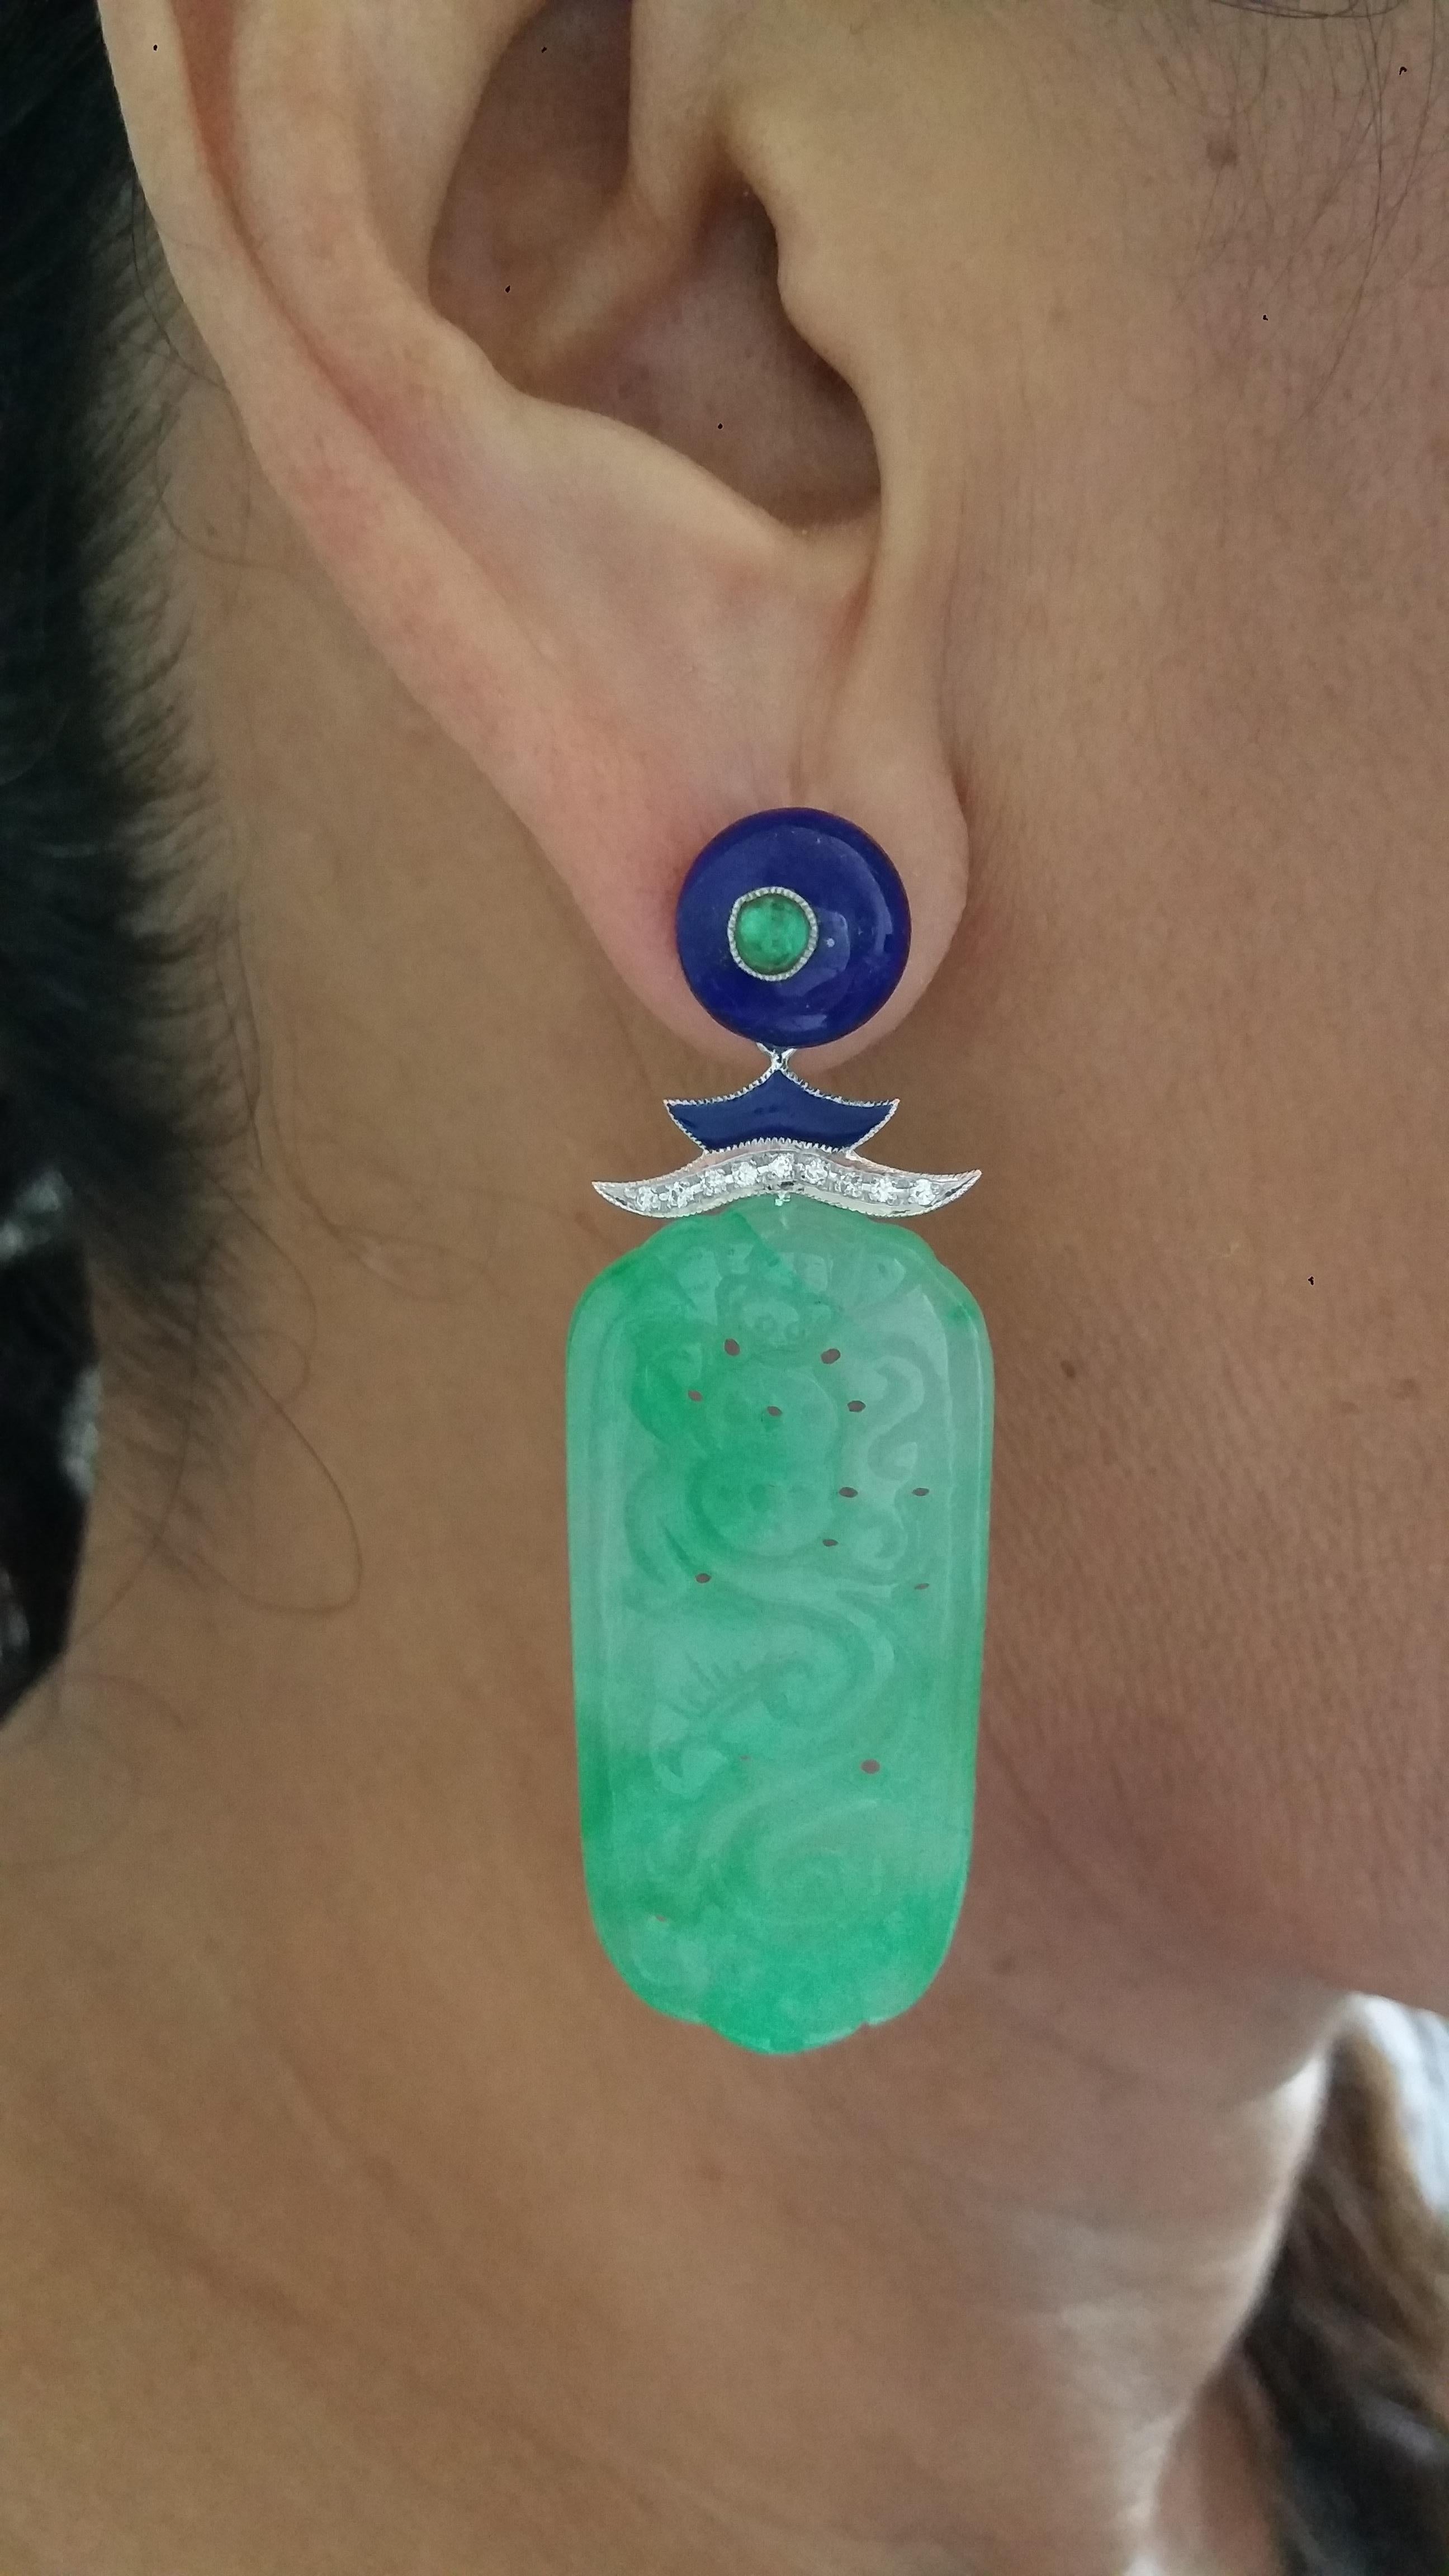 2 Lapis Lazuli  round buttons tops with small emeralds round cabochons  in the center, middle parts in white gold, 2 small emeralds,18 round full cut diamonds,blue enamel ,bottom parts are 2 carved Burma Jade 
Length 57 mm
Width 19 mm
Weight 15